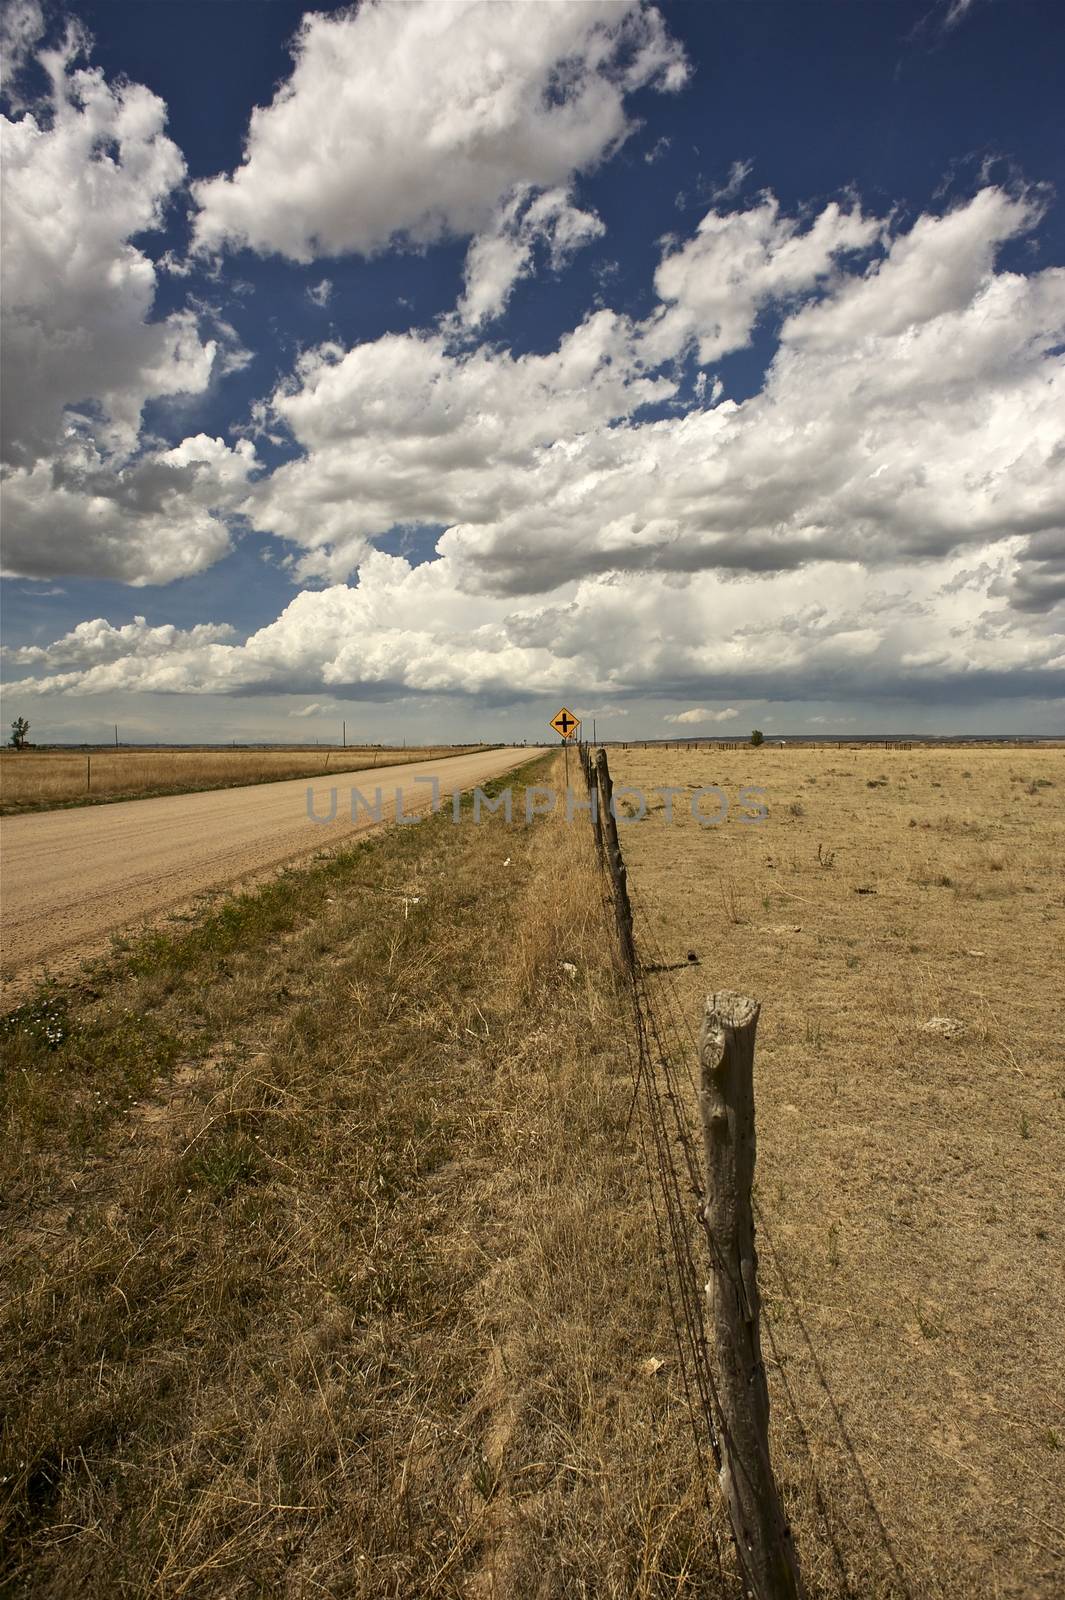 Colorado Outback. Central-East Colorado State. Colorado Plains. Country Road - Summer Day. Vertical Photo.